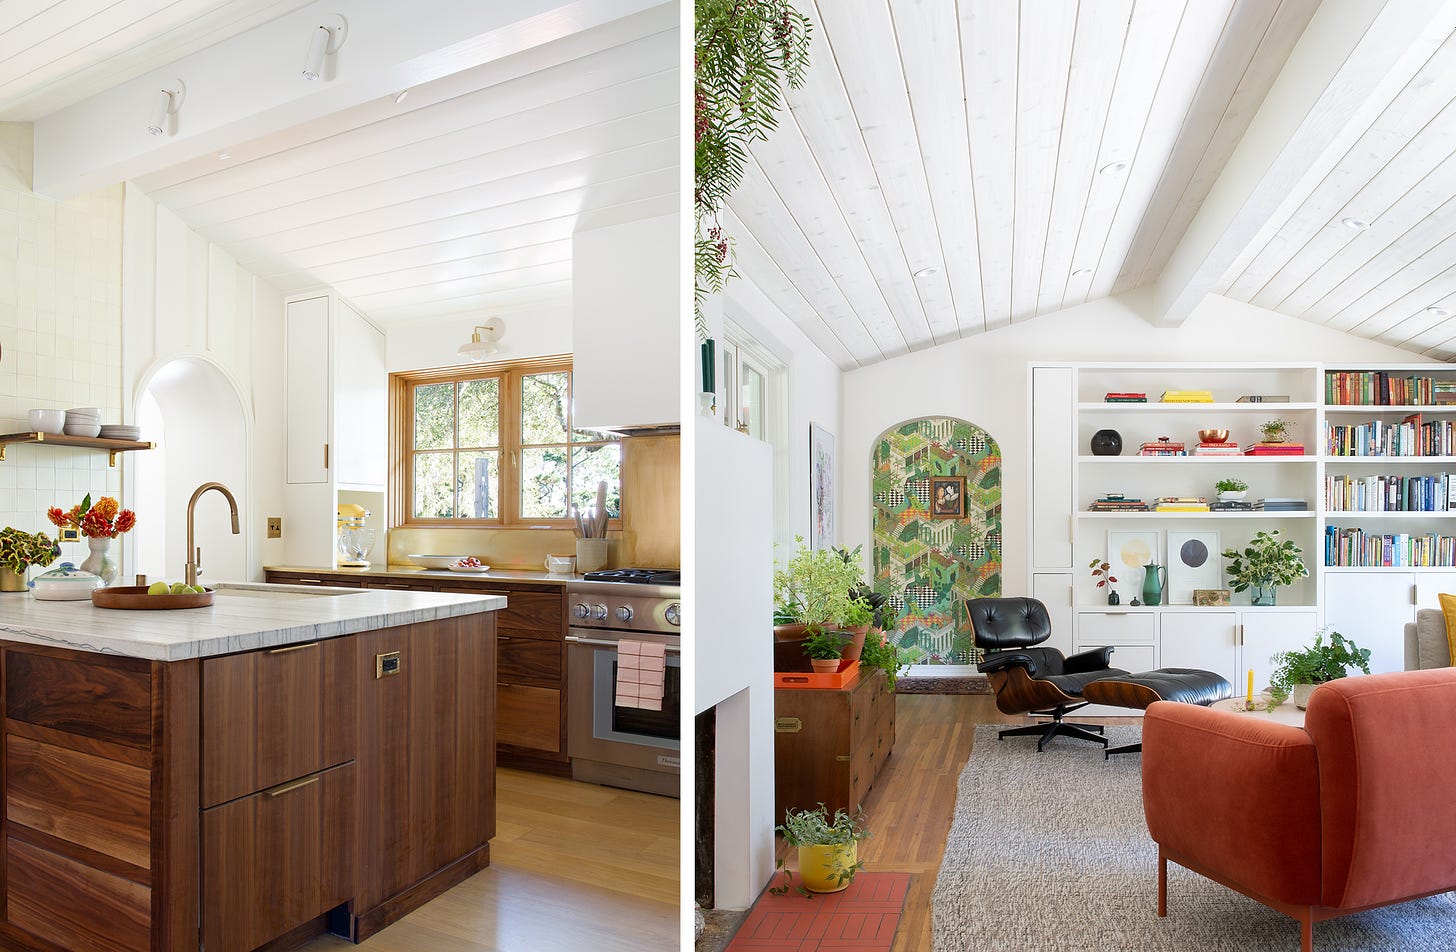 Examples of how to make a small space feel bigger